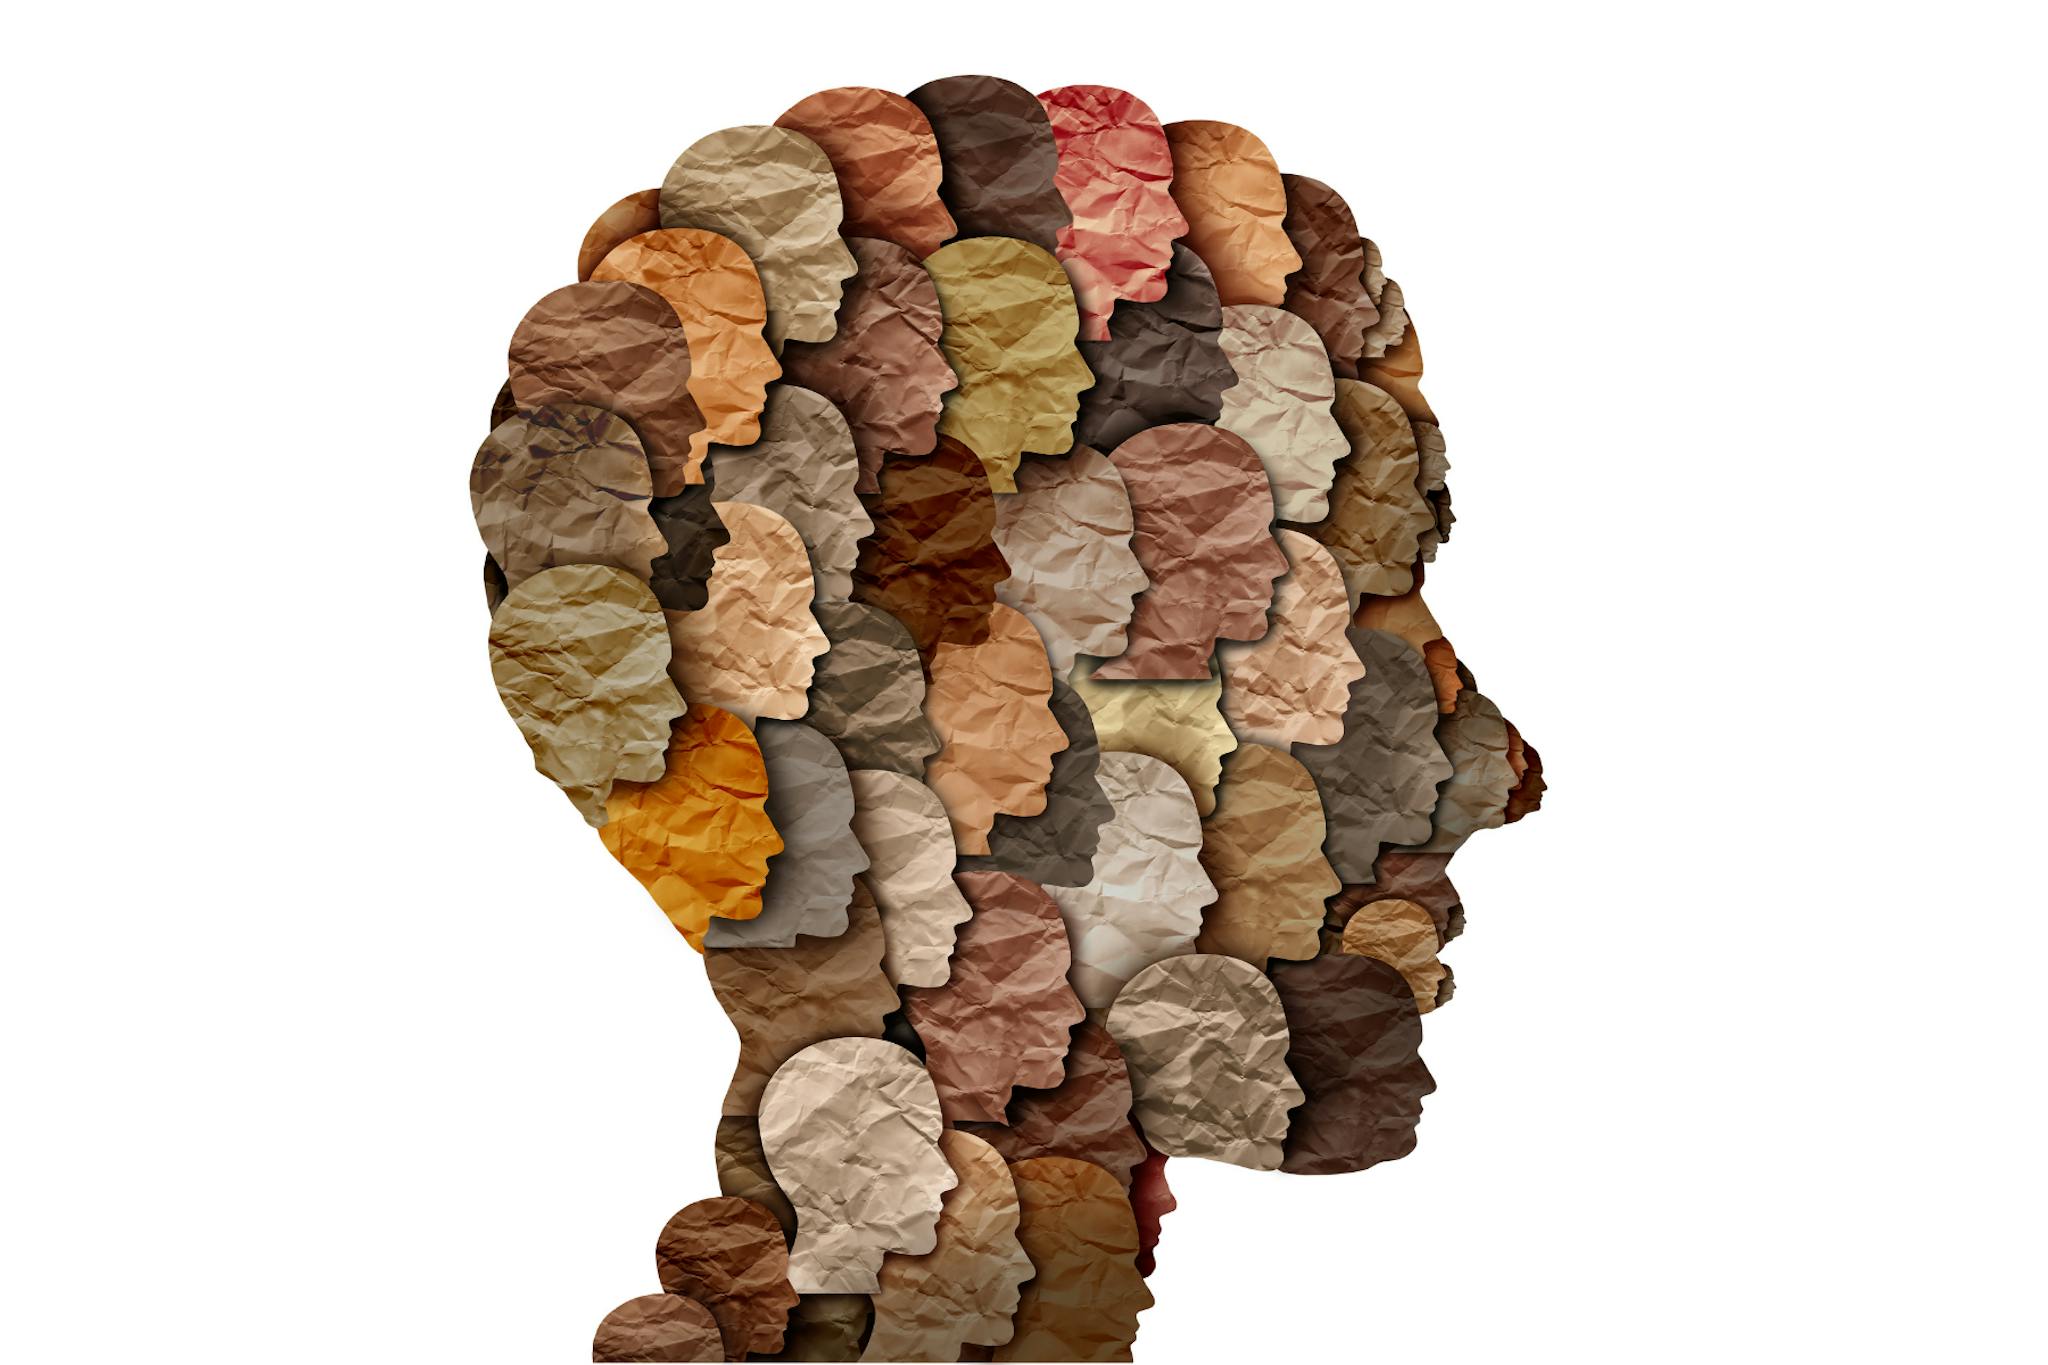 Outline of a head with smaller heads with shades of brown filling the space.